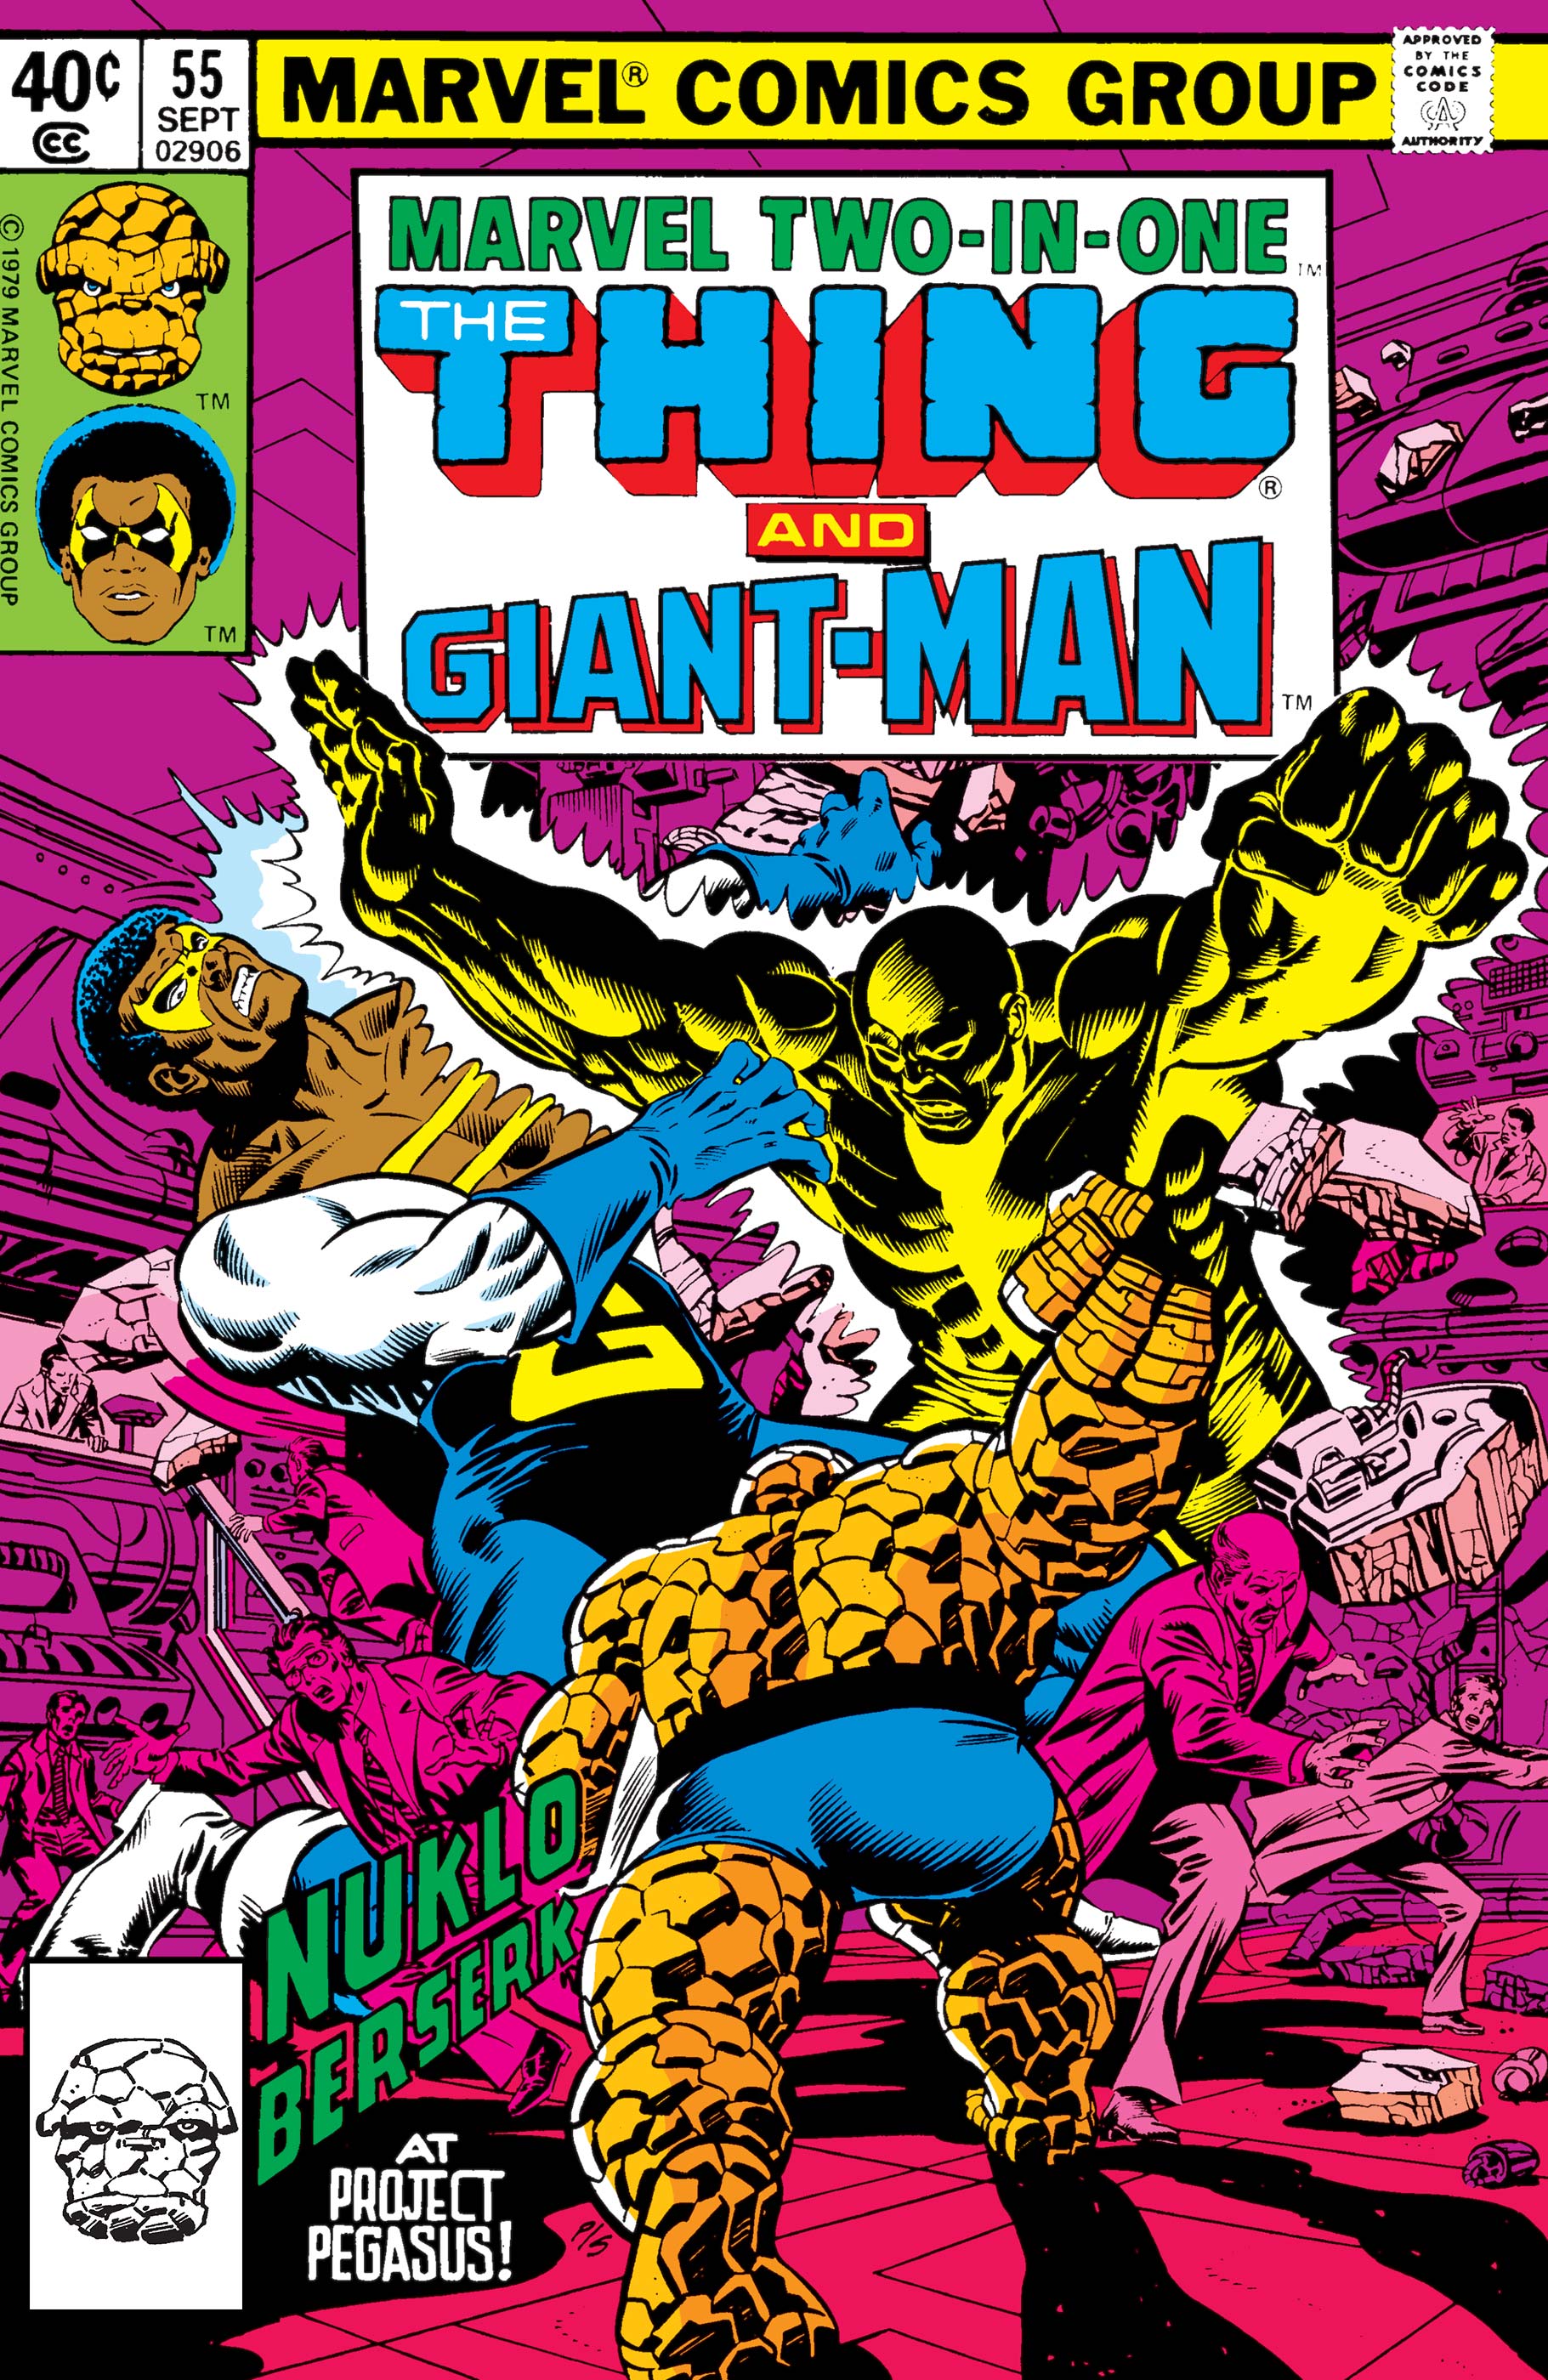 Marvel Two-in-One (1974) #55